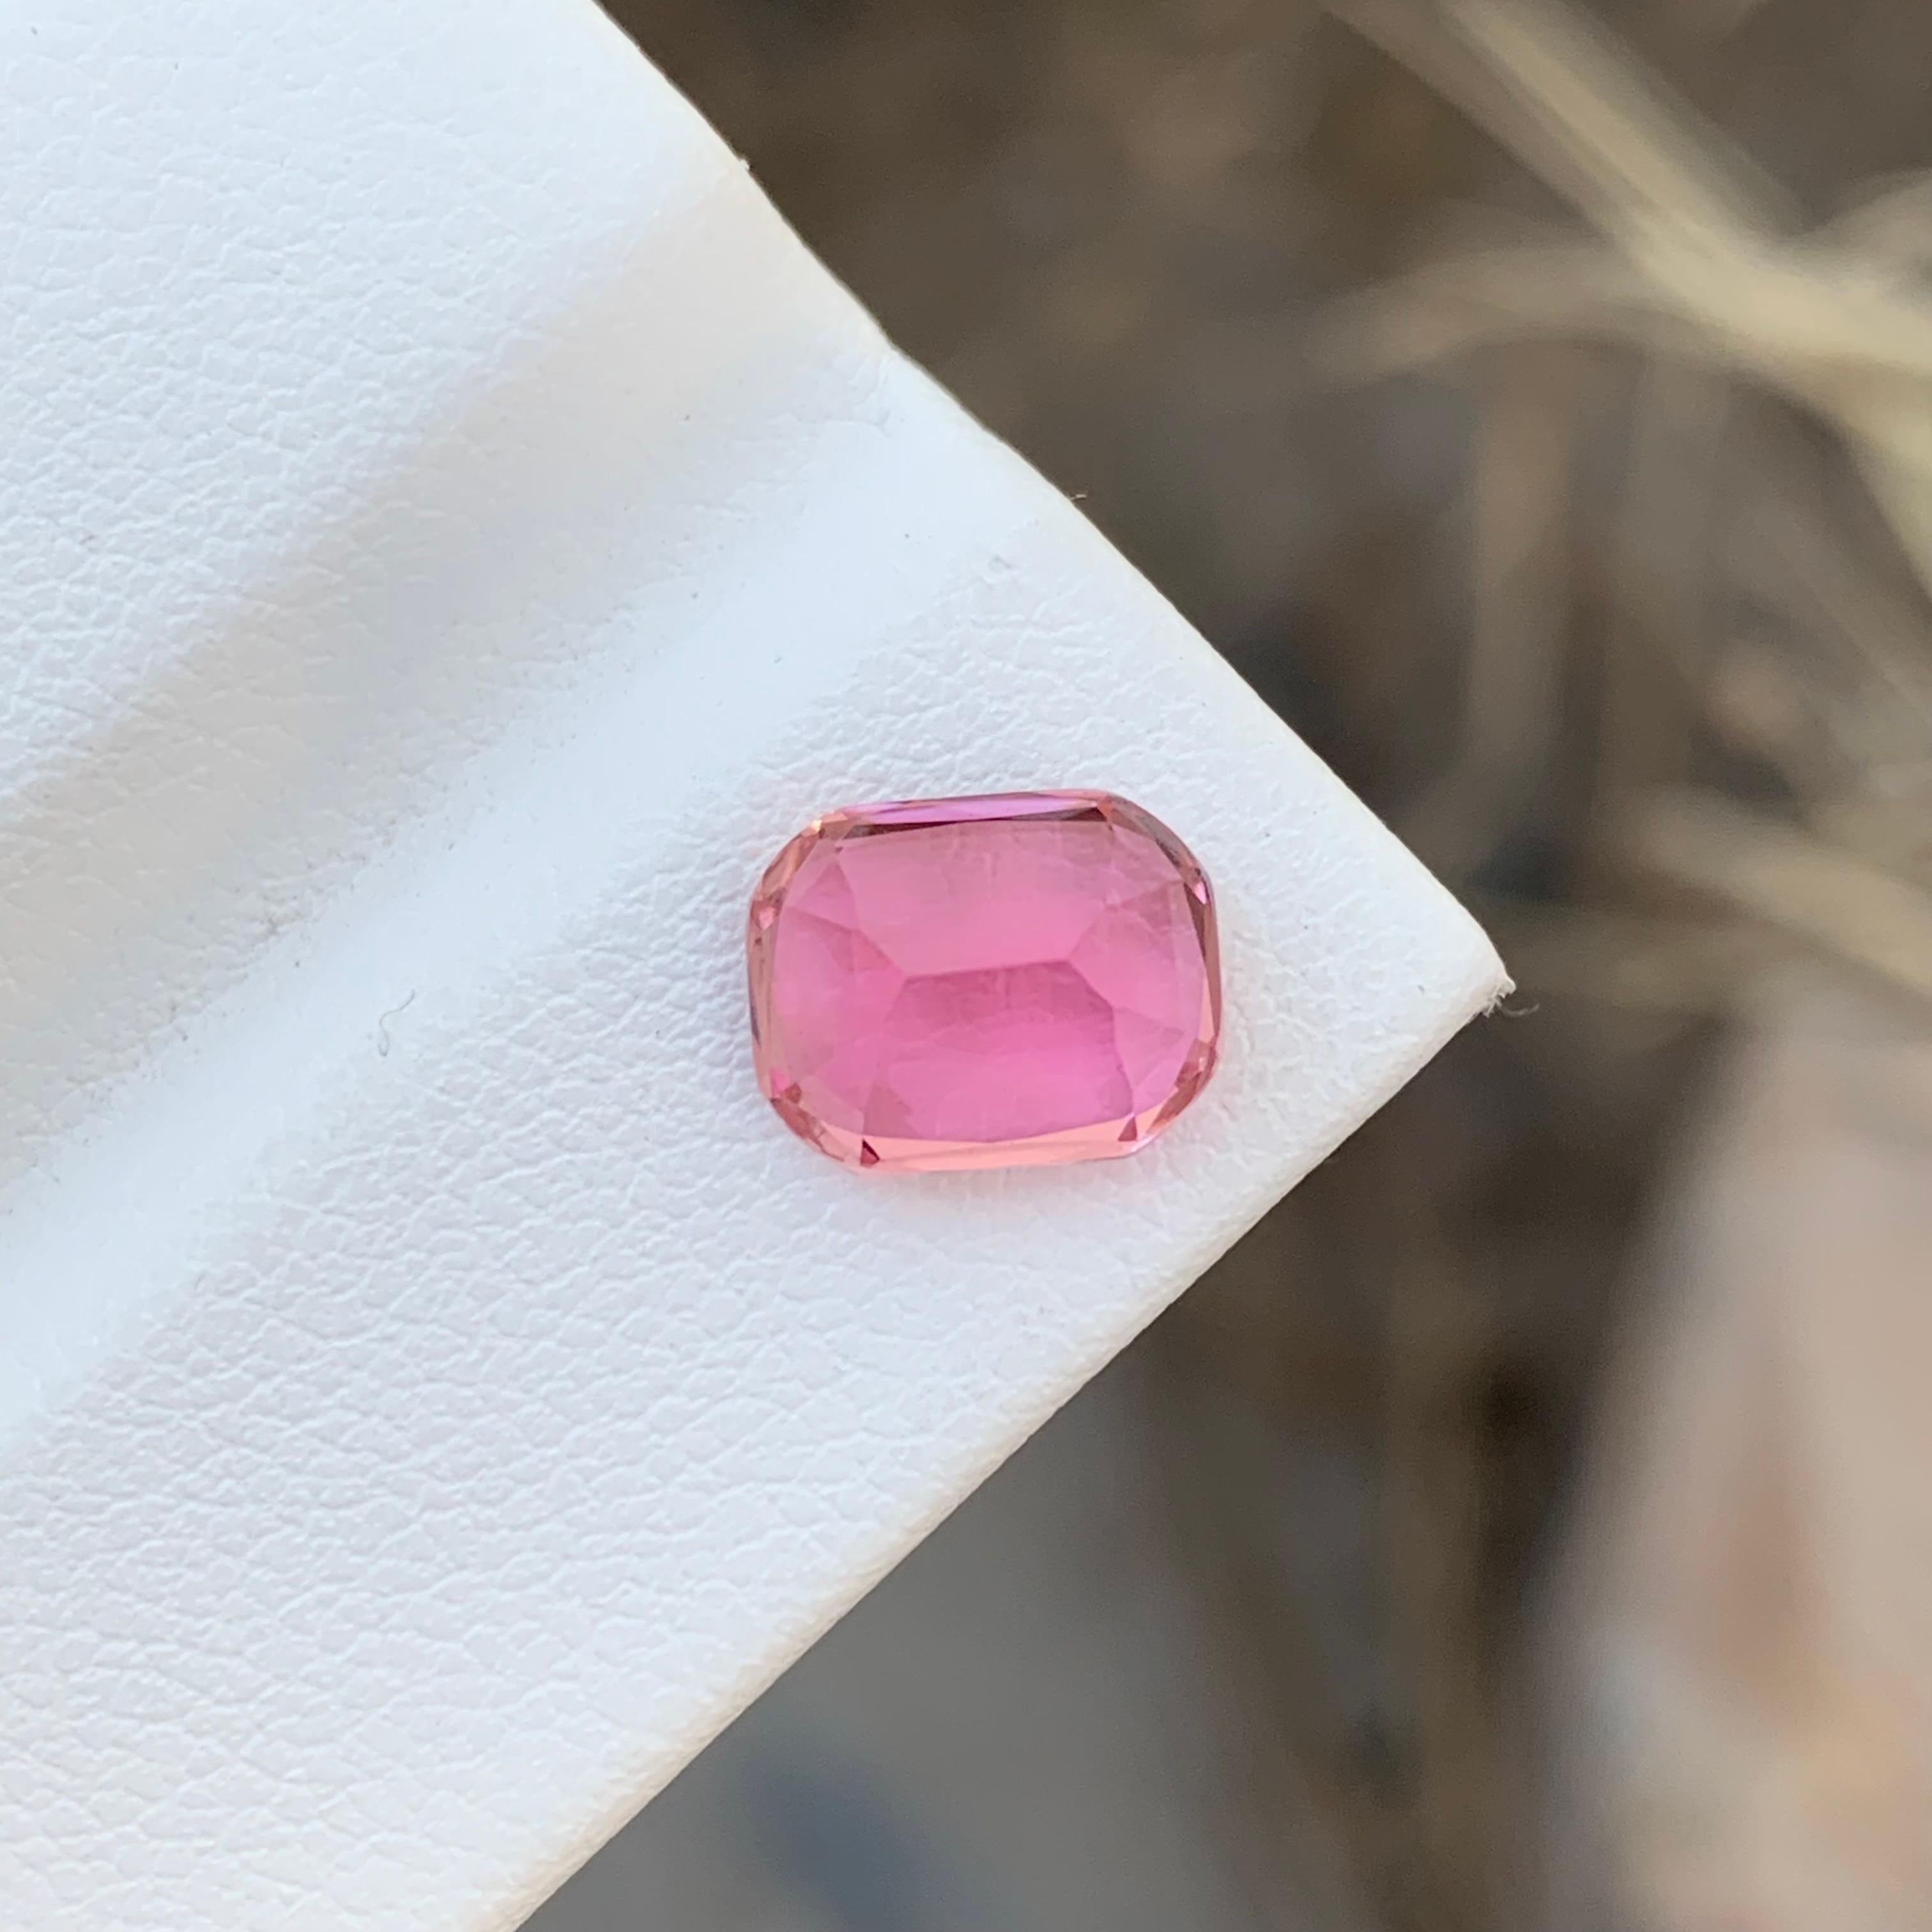 Loose Tourmaline 
Weight: 2.35 Carats 
Dimension: 8.8x7x4.8 Mm
Origin: Kunar Afghanistan 
Shape: Cushion 
Treatment: Non
Color: Pink
Certificate: On Demand
Faceted baby pink tourmaline is a gemstone that captivates with its delicate hue and